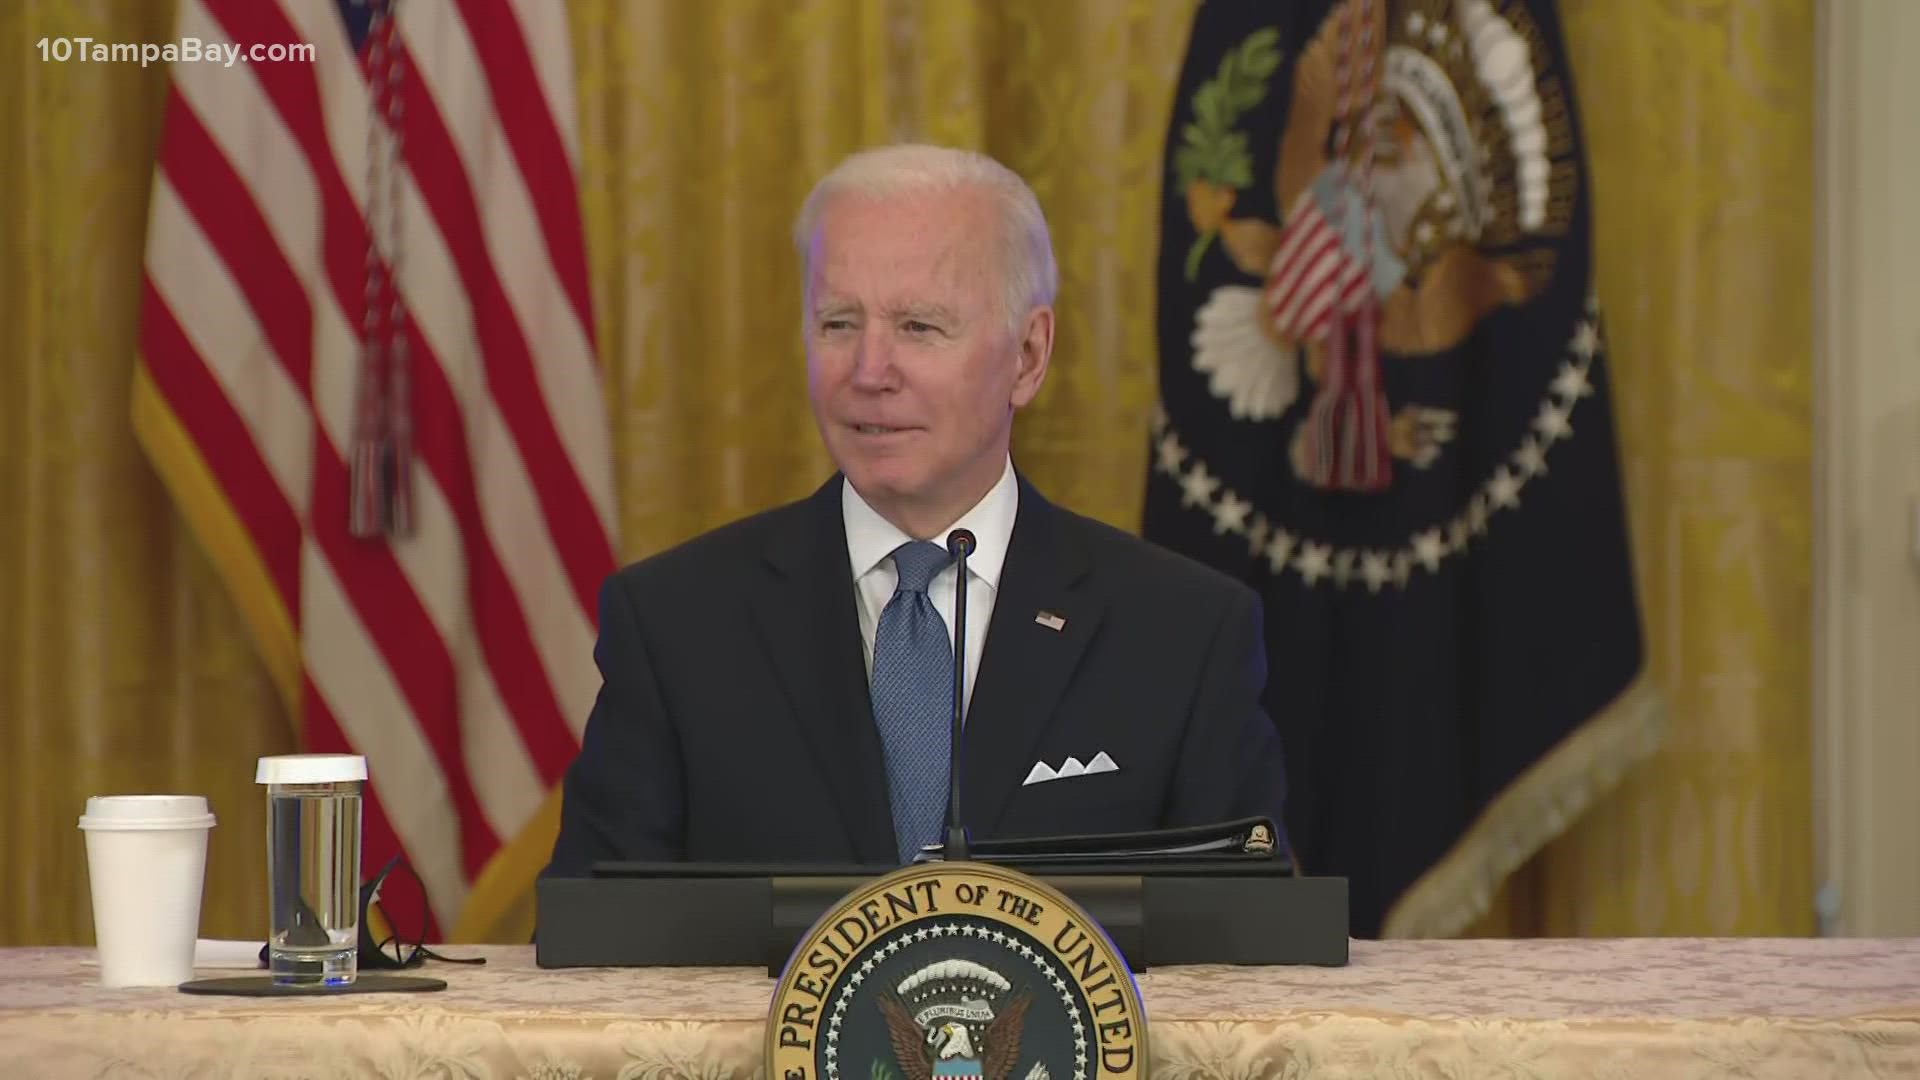 President Joe Biden was caught on a hot mic, describing somebody as "a stupid son of a b****" following an event to discuss inflation.